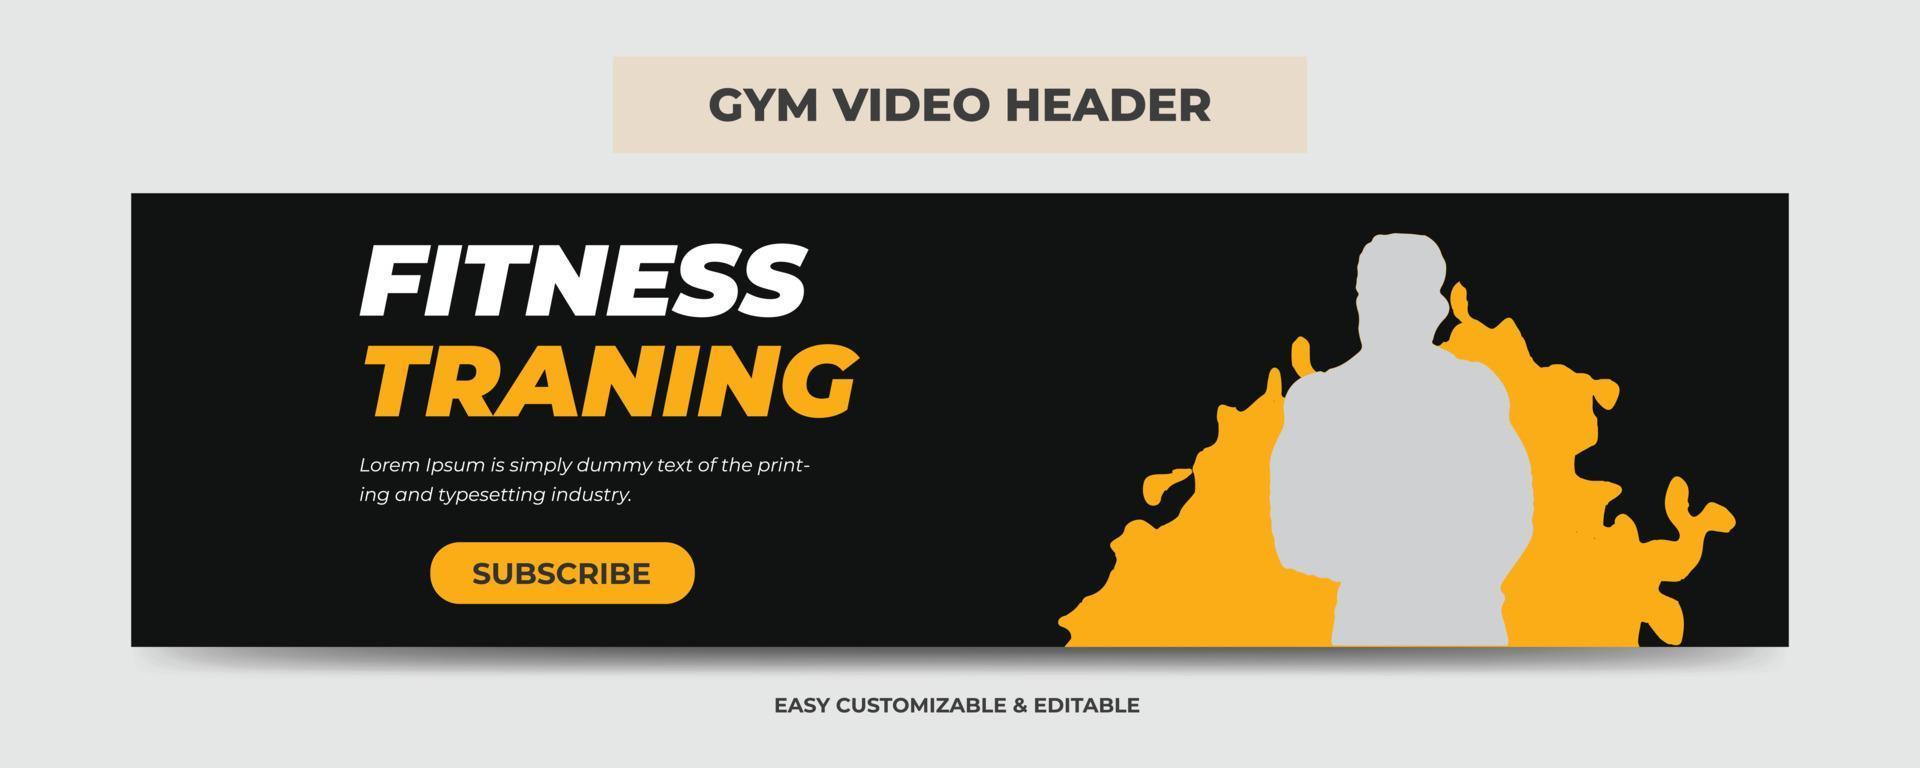 Gym video cover header template vector